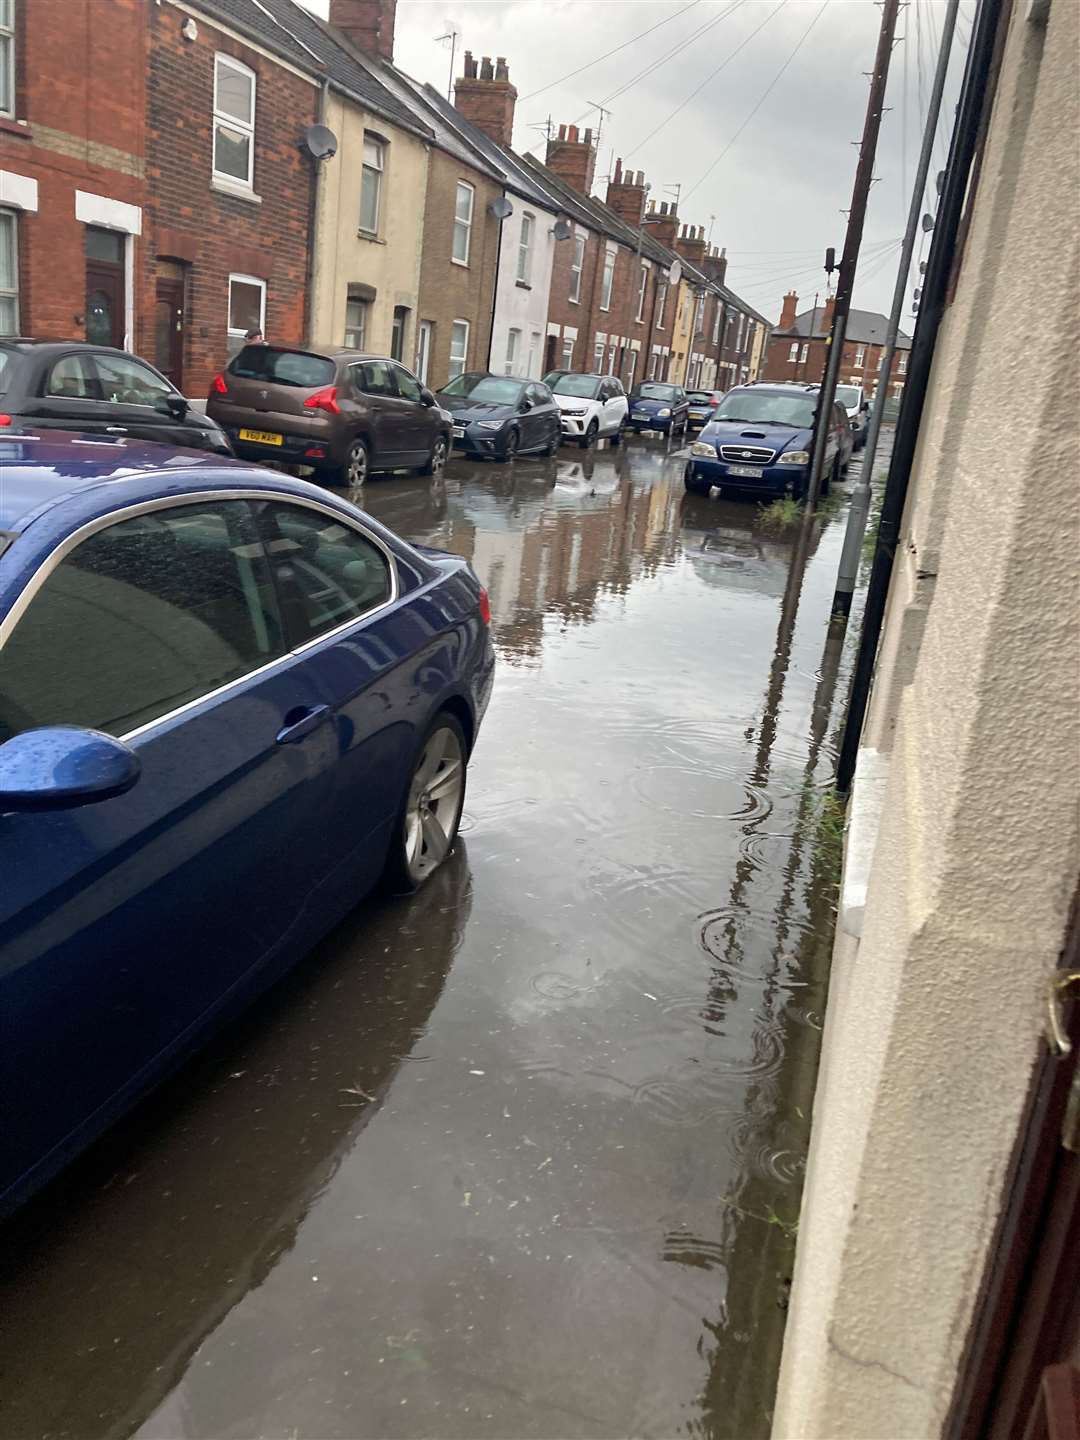 Norfolk County Council says work to clear the drainage system has been hampered by a driver who failed to move their vehicle